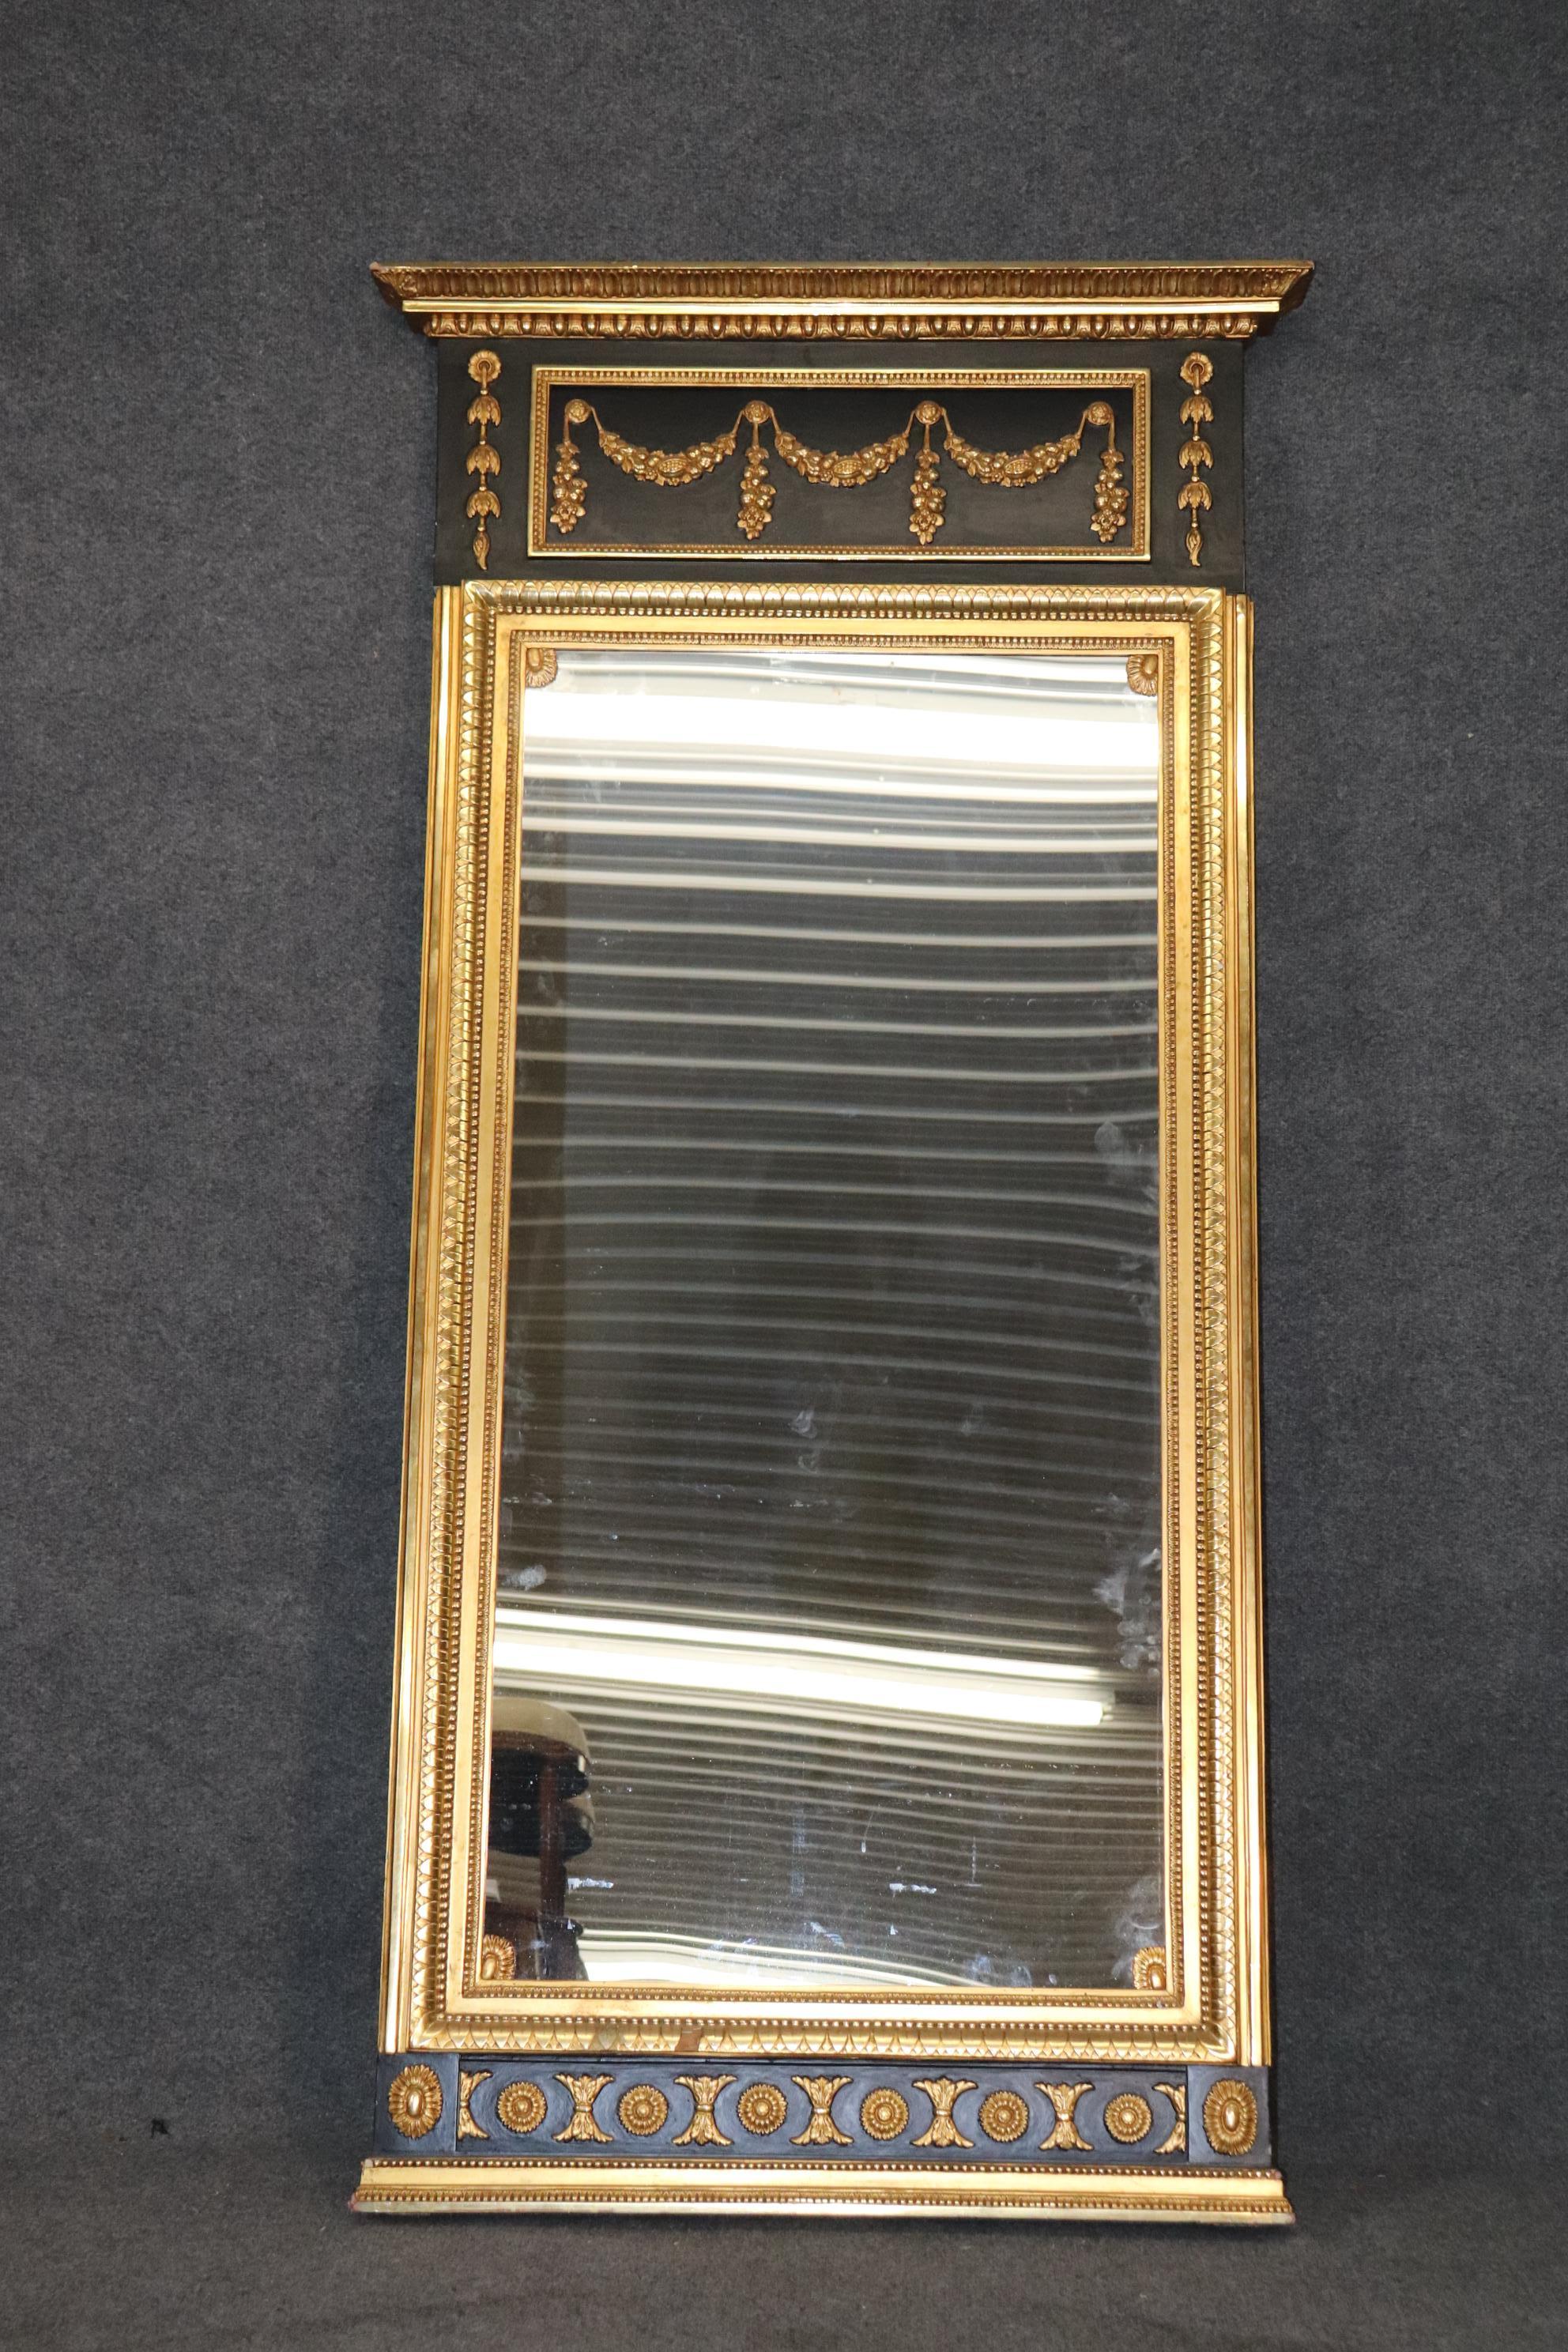 This is a beautiful Italian-made French Empire style wall mirror. The mirror is not beveled and is in good condition and has only minor signs of wear and use. Measures 78.75 tall x 38.75 wide x 5 inches deep.